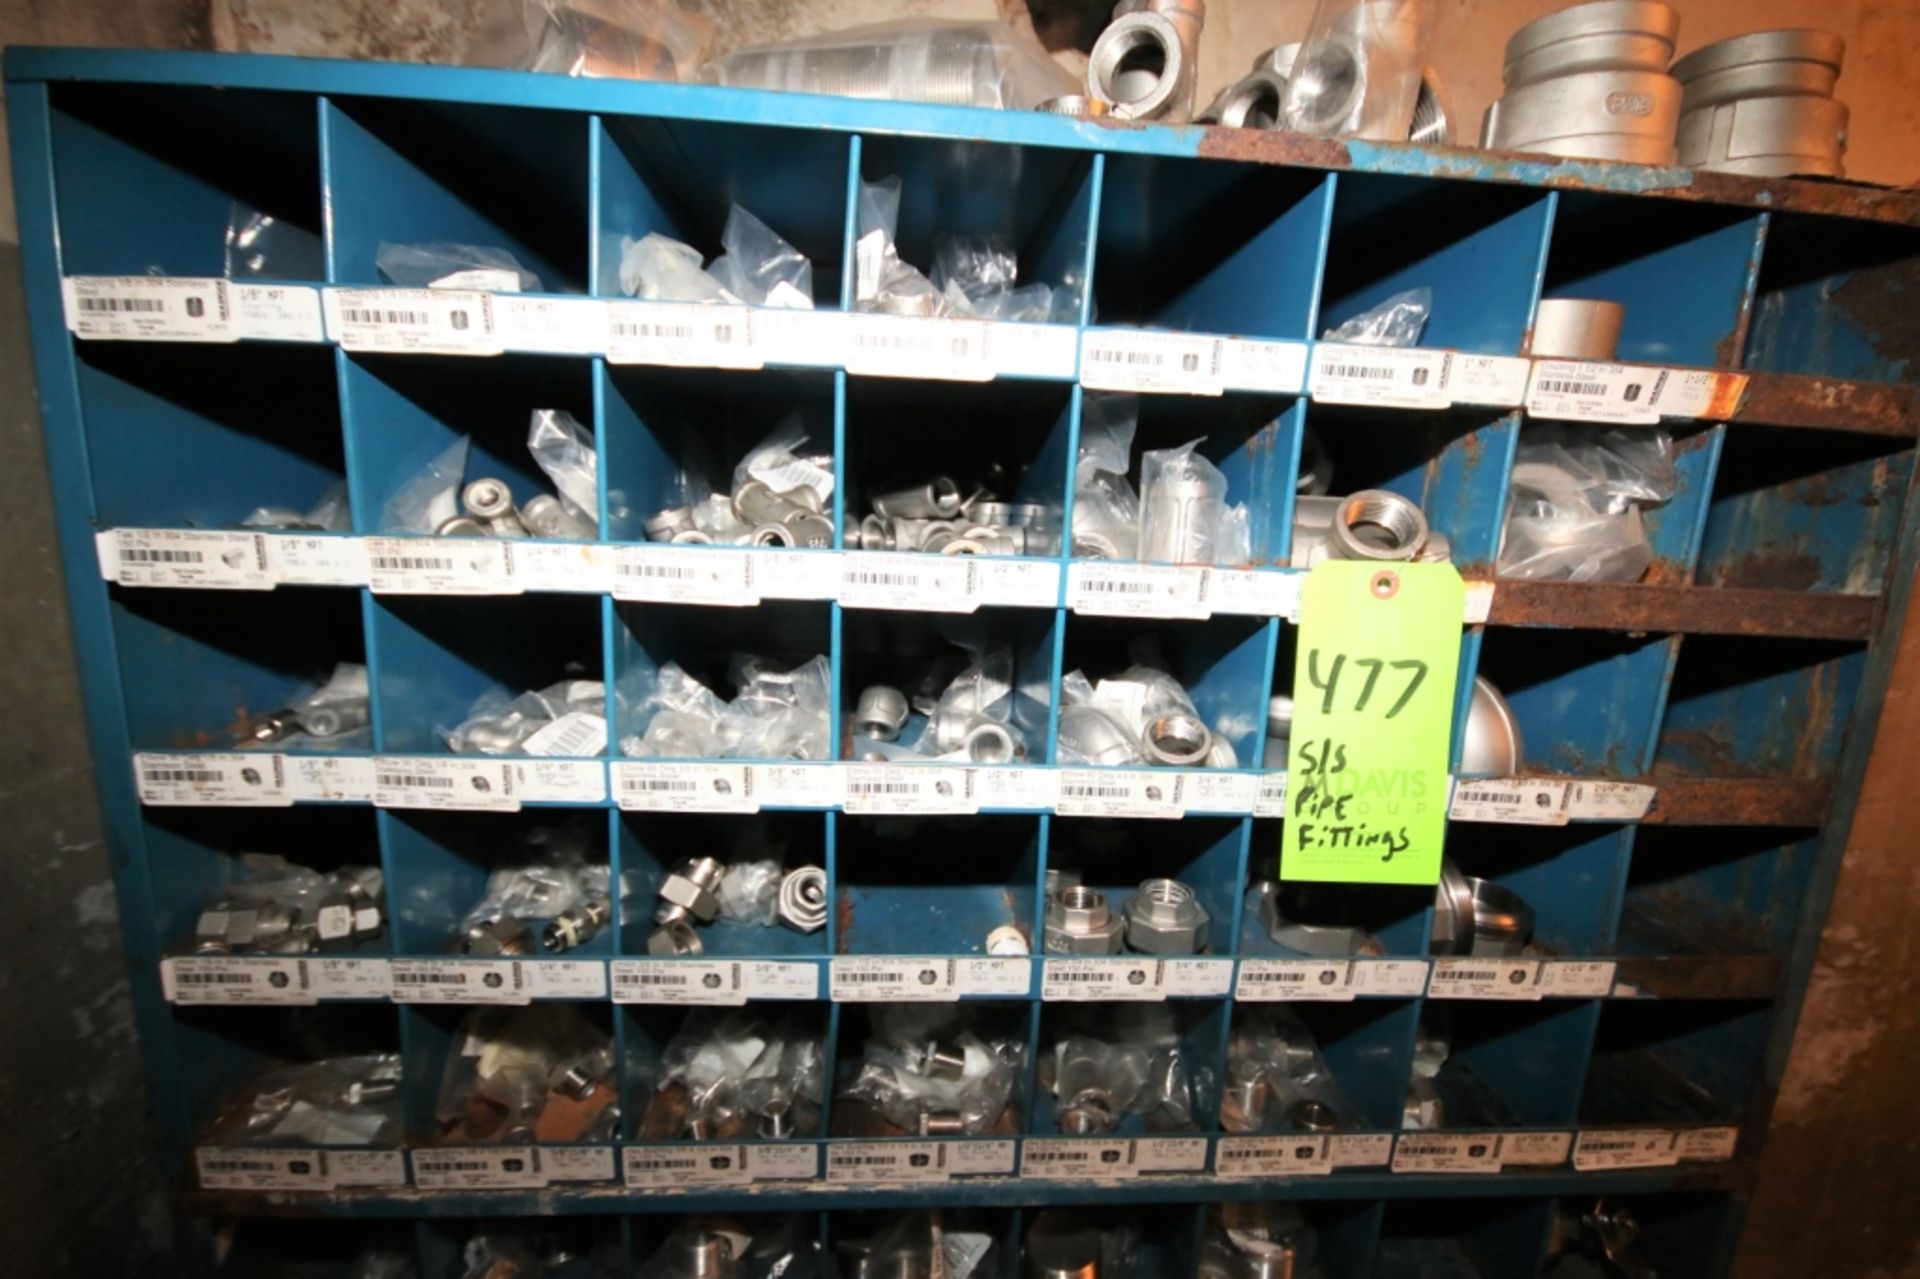 Lot of S/S Plumbing Fittings with 112 Hole Parts Bin Included - Bild 2 aus 4